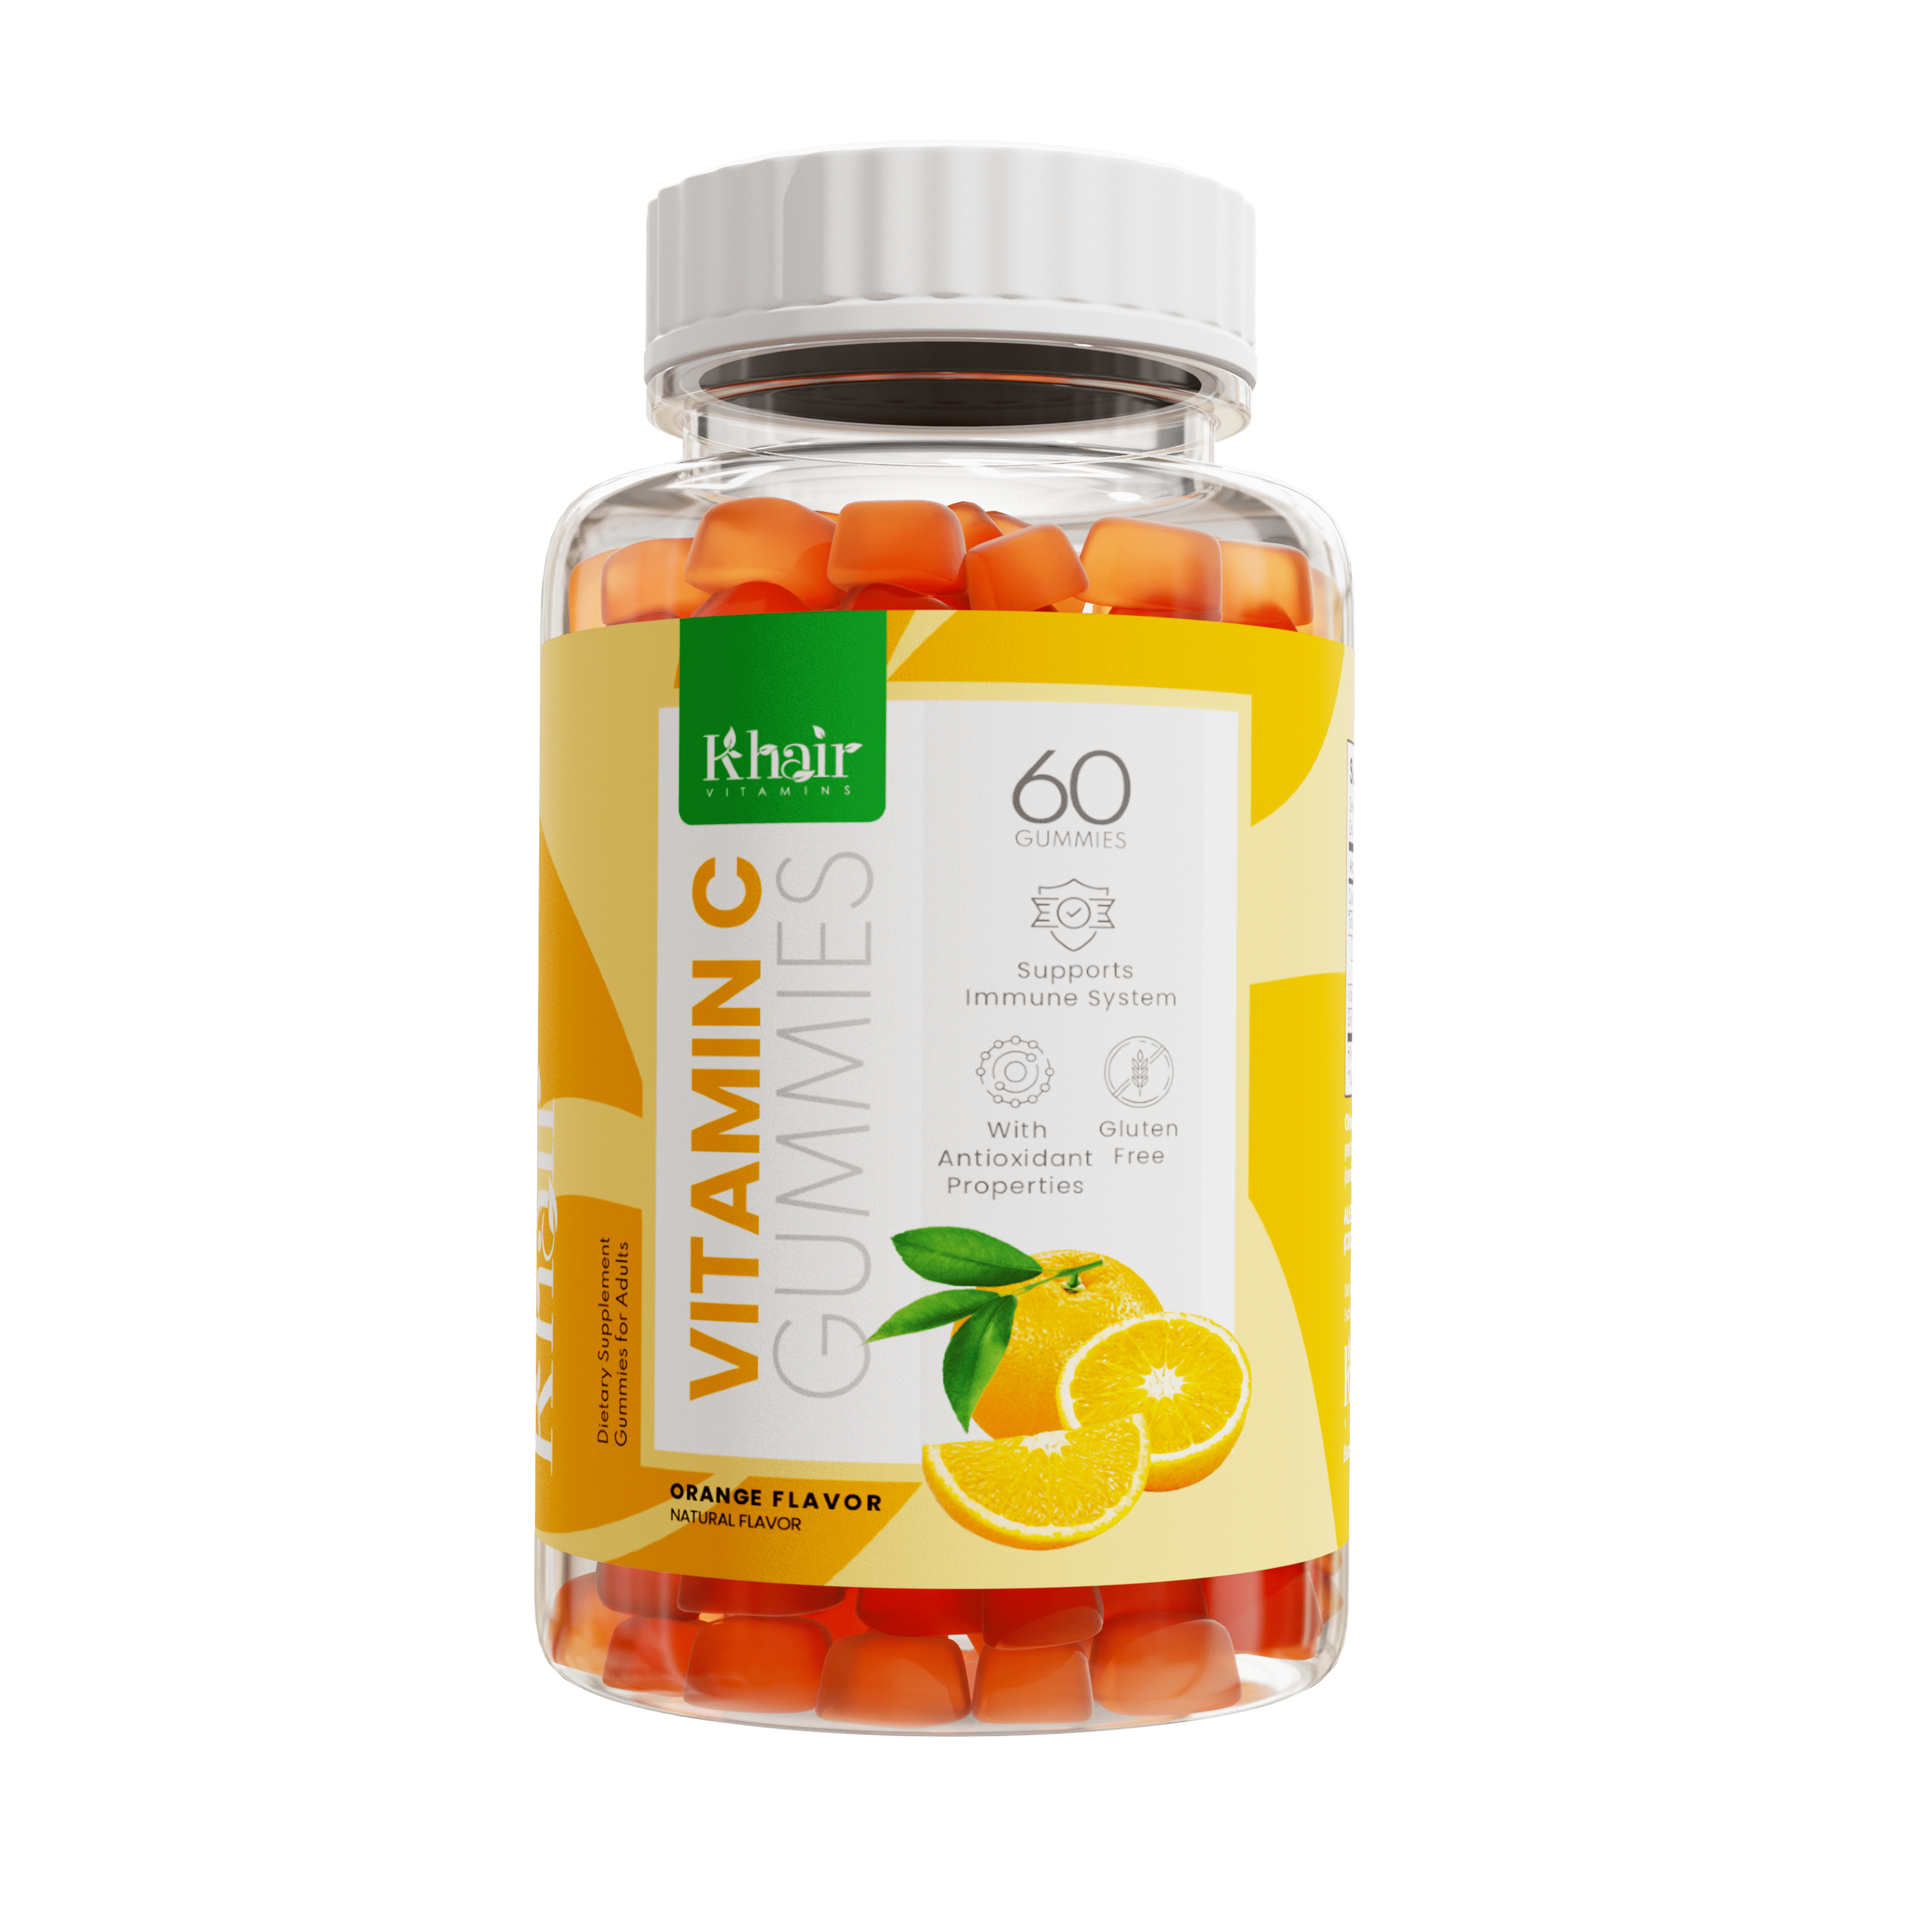 Vitamin C gummies with orange slices: a colorful assortment of chewable supplements infused with the tangy flavor of fresh oranges.